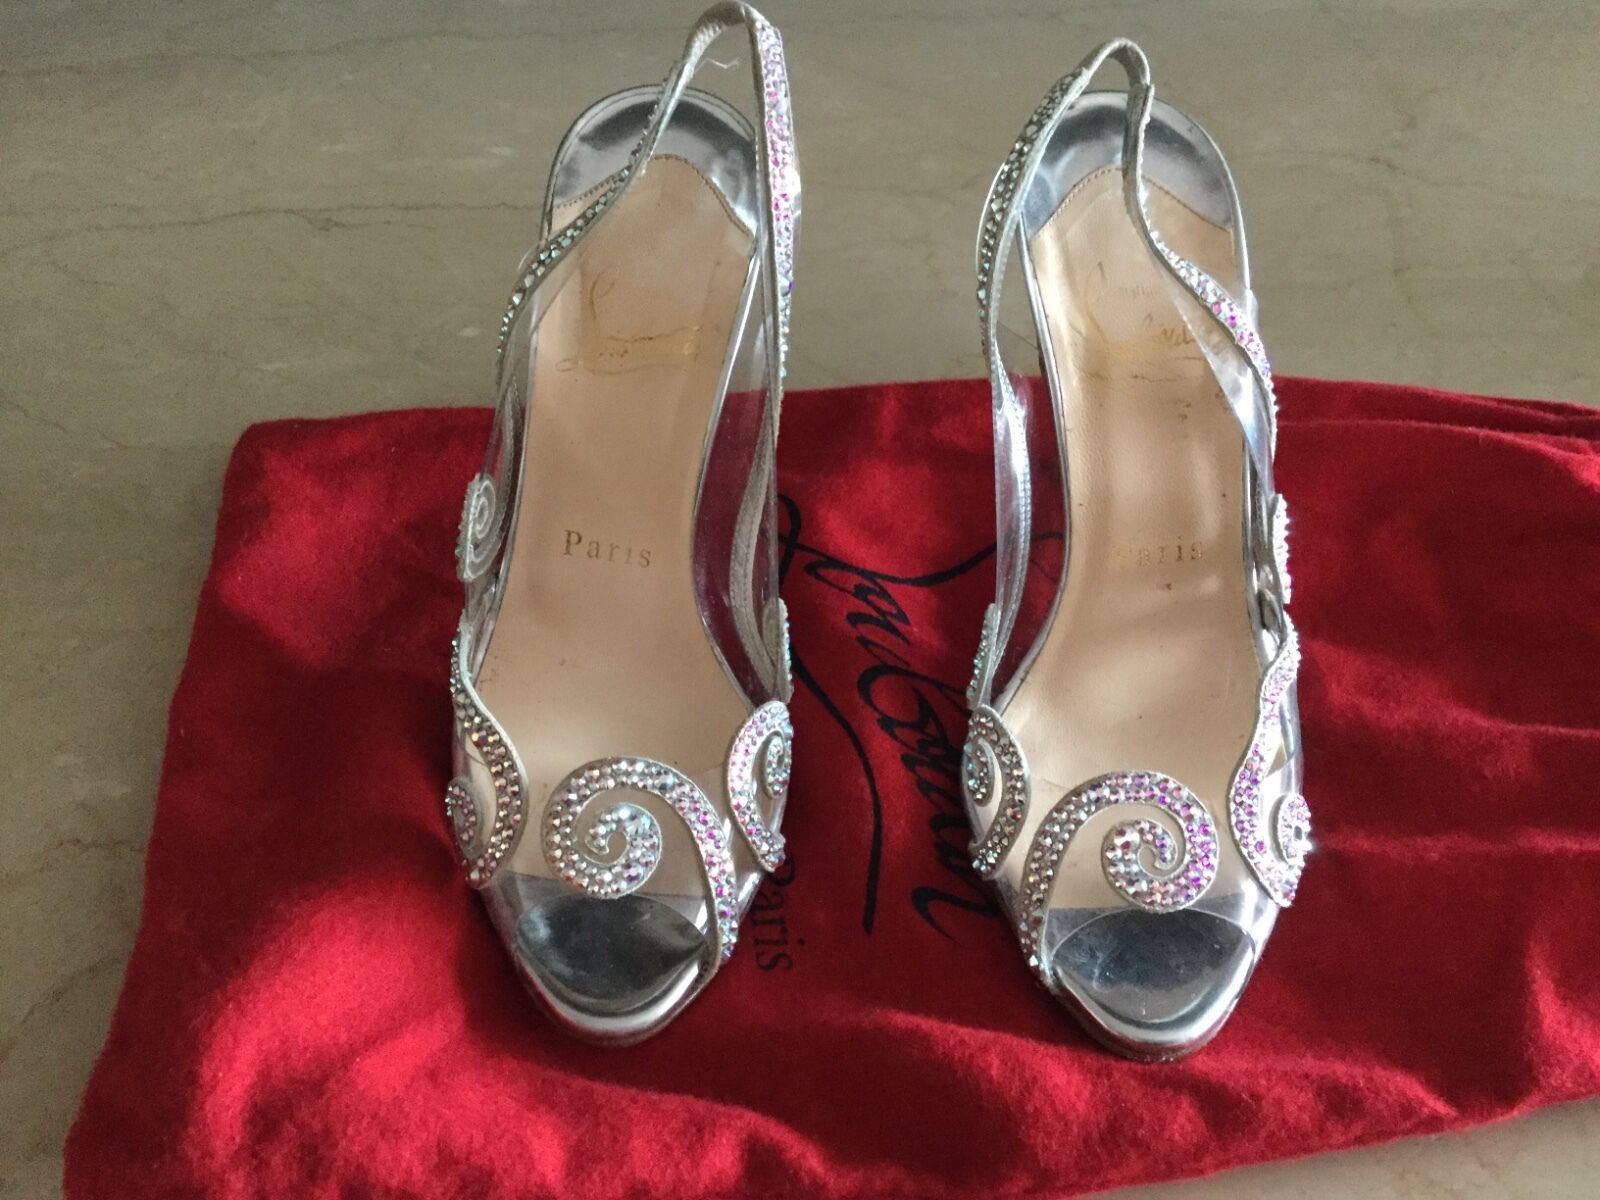 Christian Louboutin pvc clear shoes with straws Chrystal\'s size 35.5 SOLD OUT